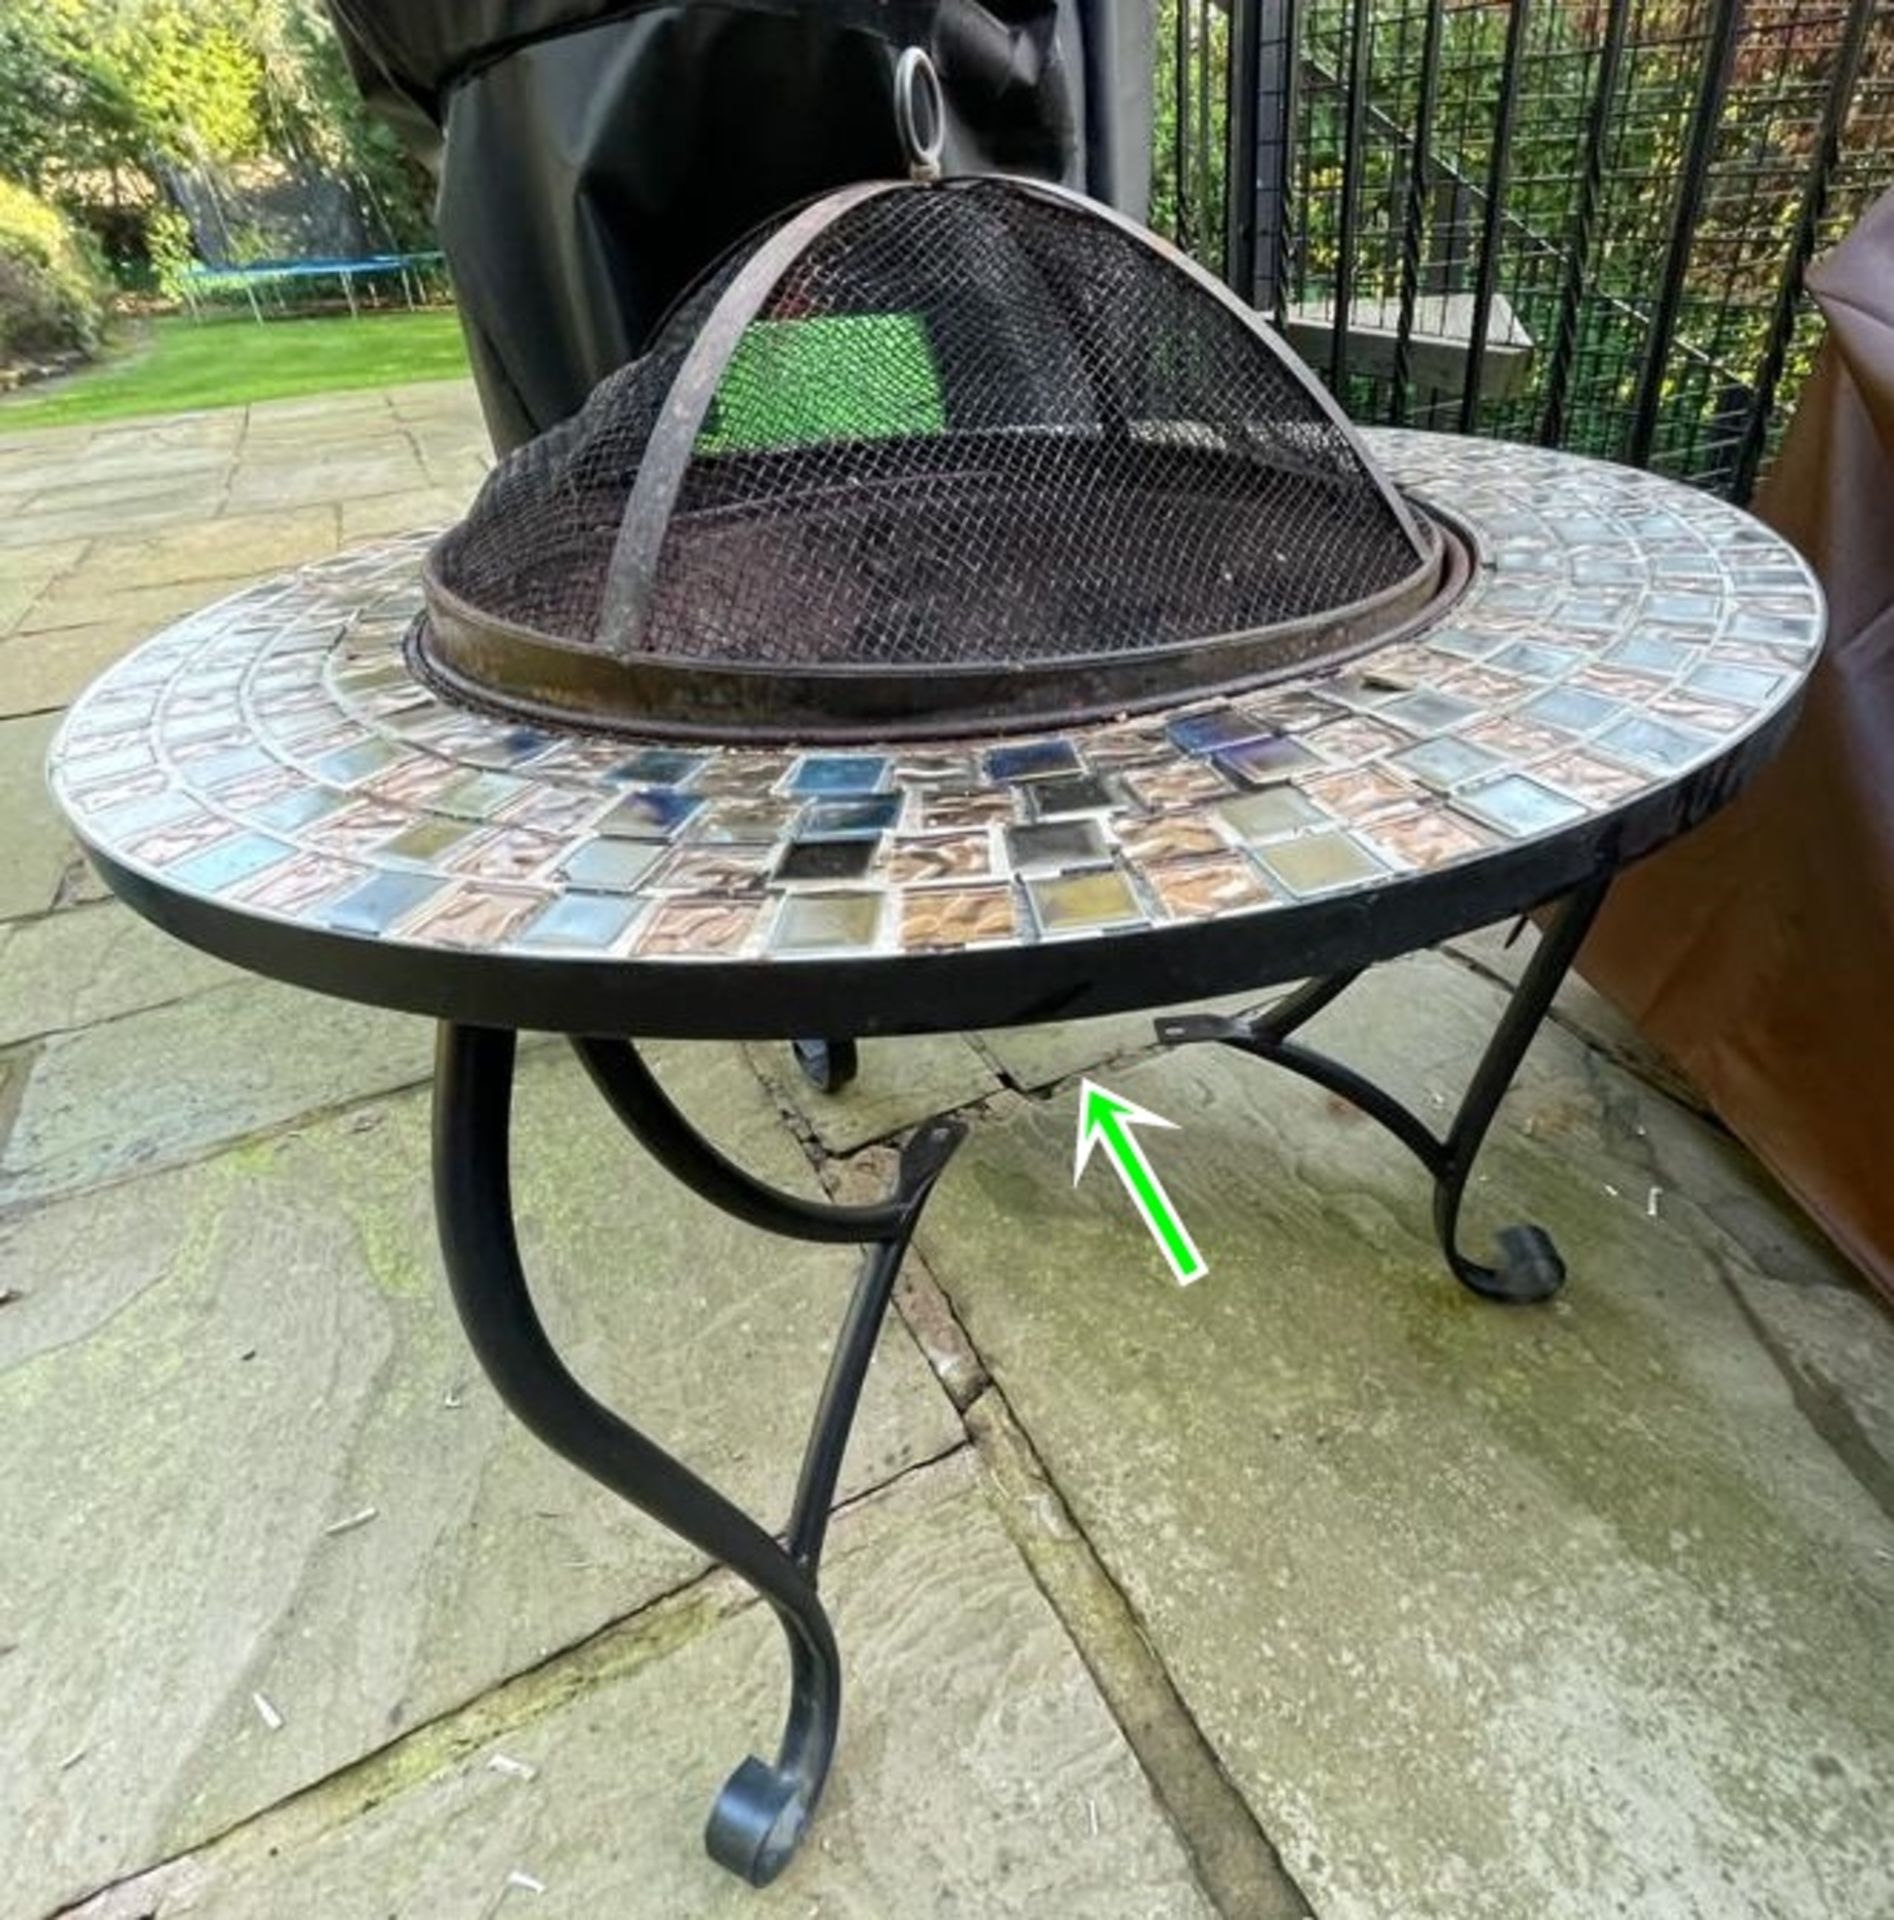 1 x Fire Pit With Tiled Surround - Preowned, From An Exclusive Property - Dimensions: Height H49cm / - Image 4 of 4